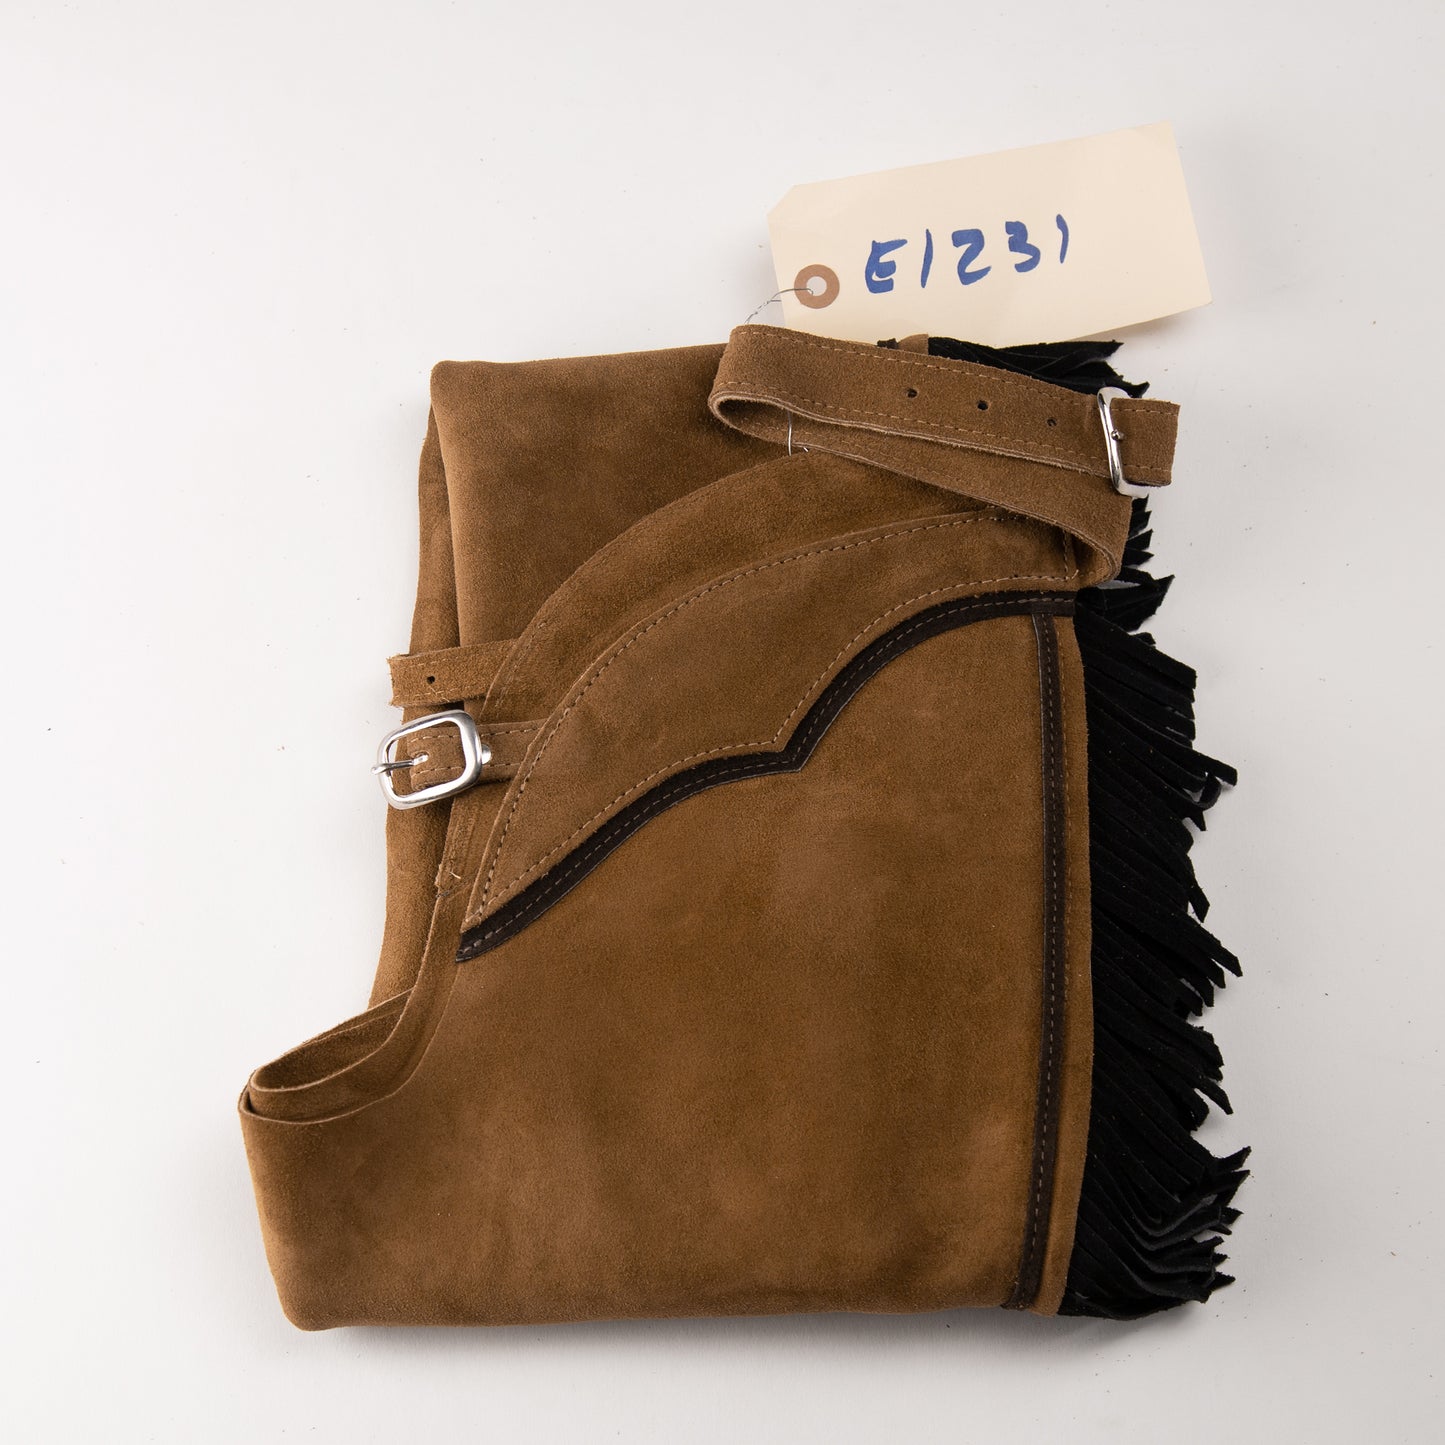 English Schooling Chaps - Toast Suede - Black Fringe and Brown Stripe